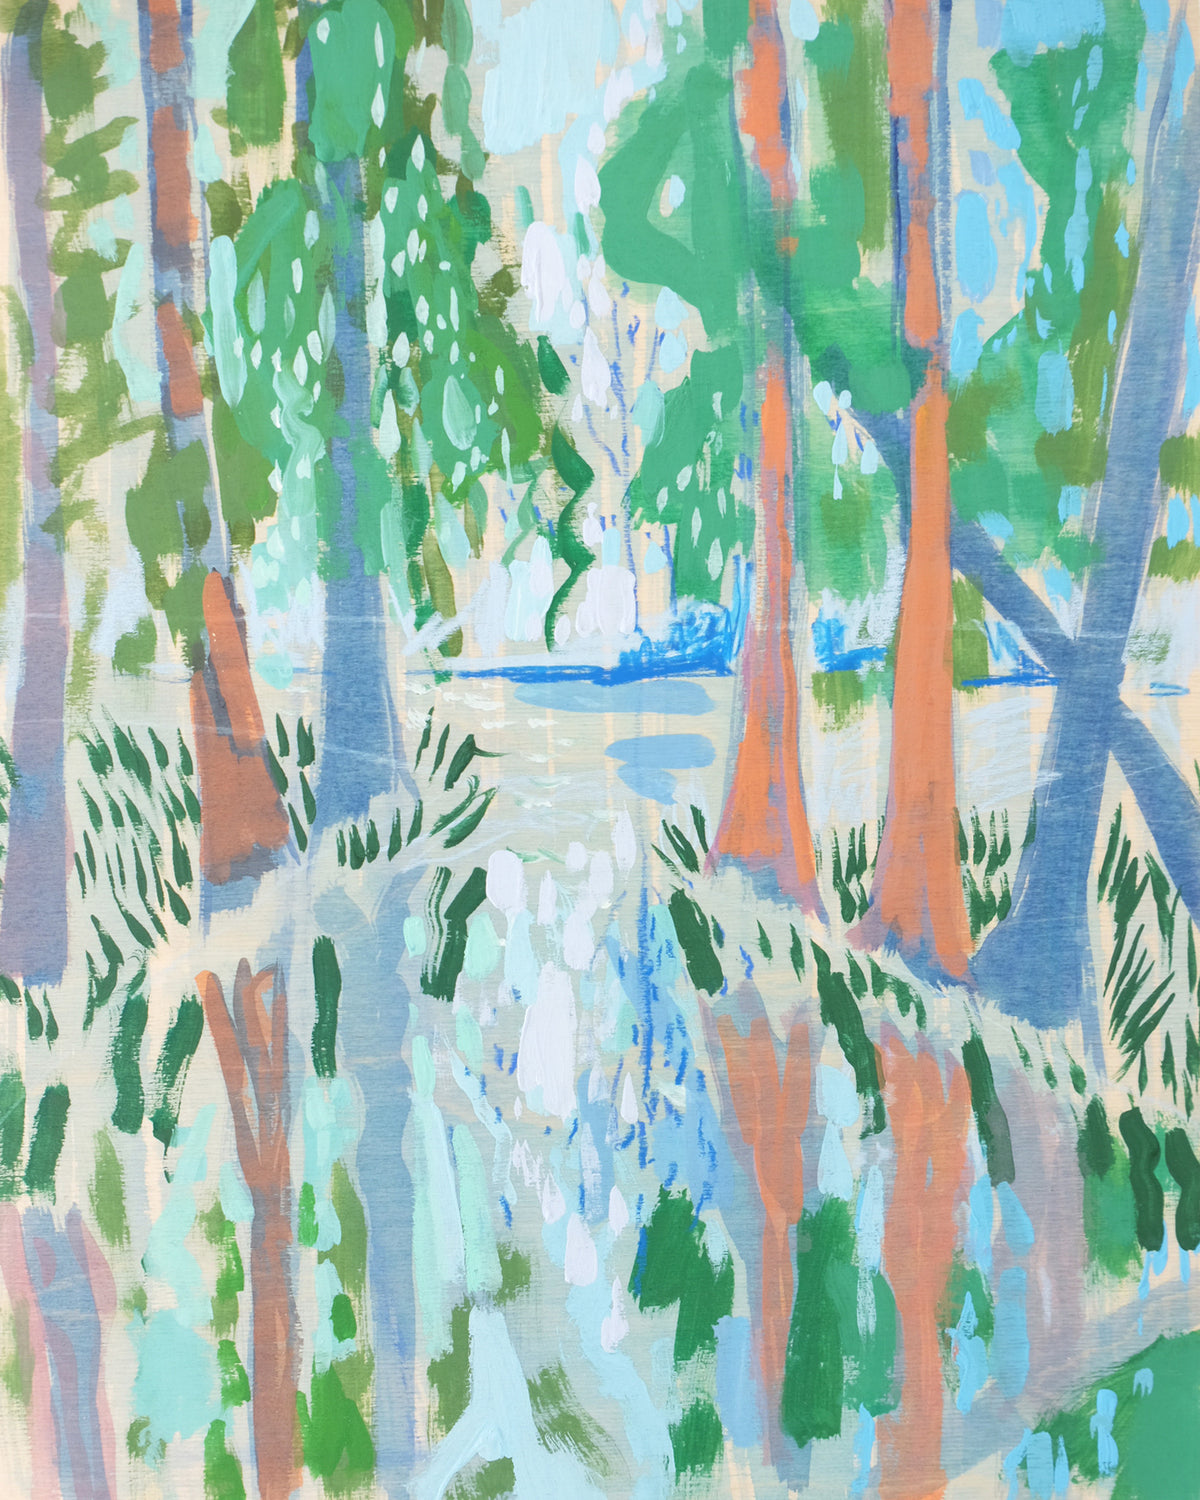 Lowcountry Landscape No. 35 - 16x20